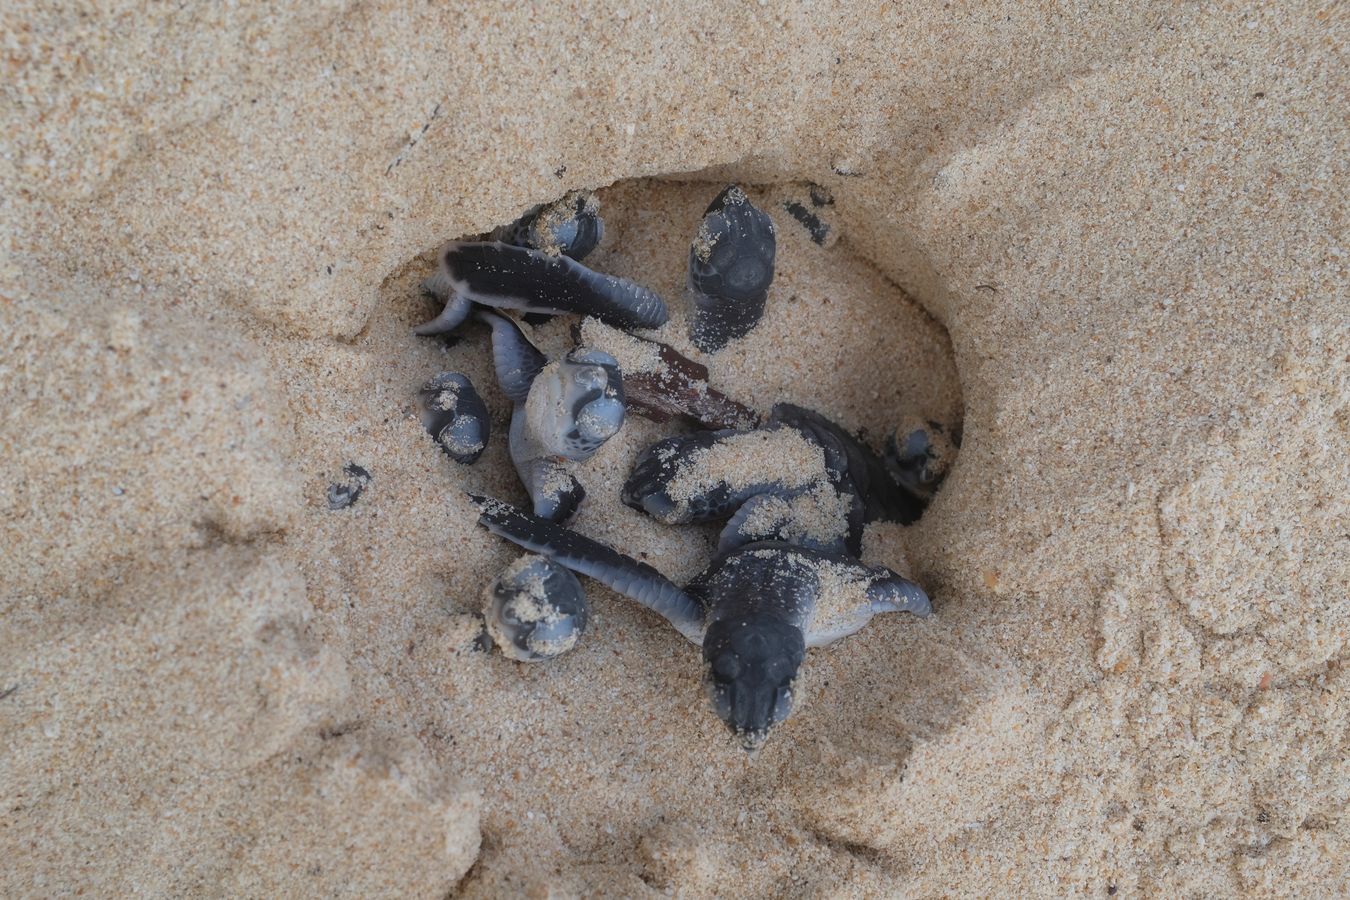 Newborn green turtle emerging from the sand, hatched naturally on the beach.